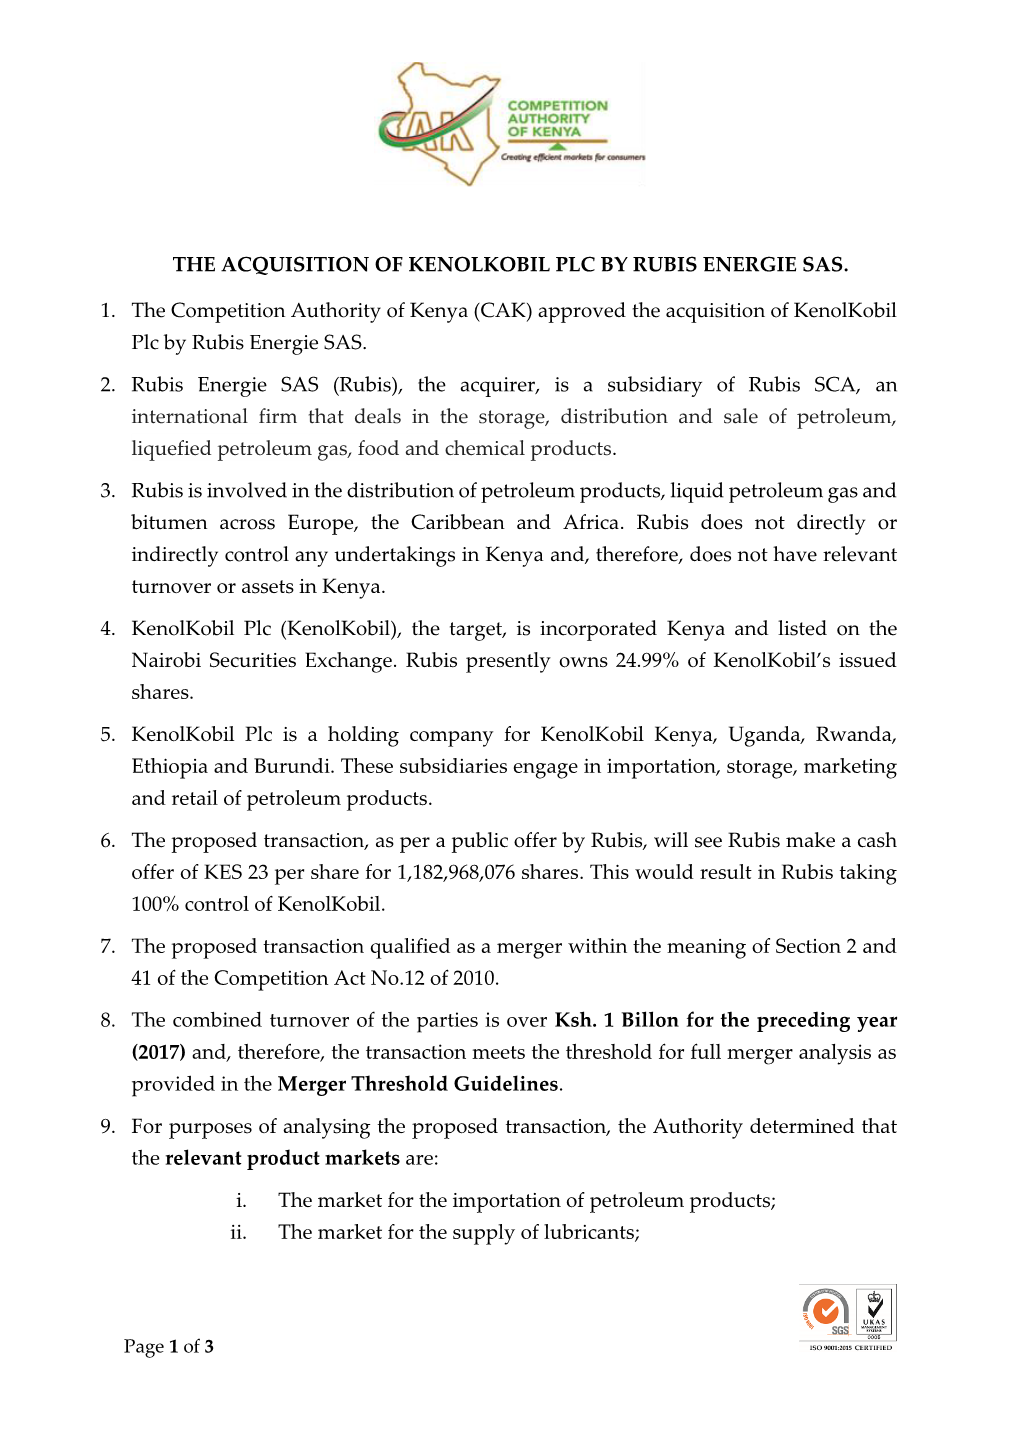 The Acquisition of Kenolkobil Plc by Rubis Energie Sas